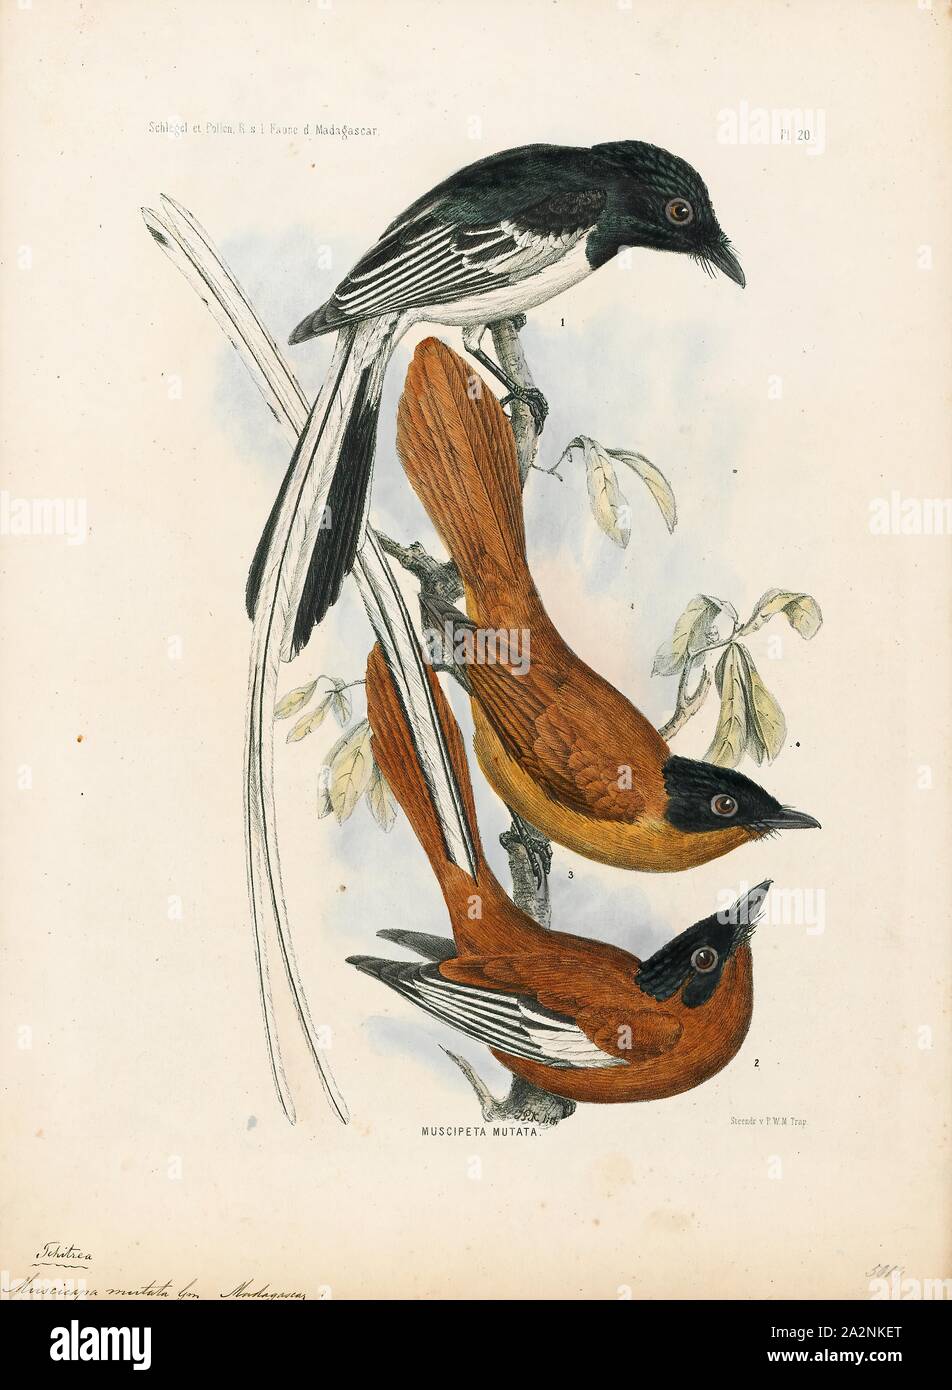 Tchitrea mutata, Print, The paradise flycatchers (Terpsiphone), are a genus of bird in the family Monarchidae. The genus ranges across Africa and Asia, as well as a number of islands. A few species are migratory, but the majority are resident. The most telling characteristic of the genus is the long tail streamers of the males of many species. In addition to the long tails the males and females are sexually dimorphic and have rufous, black and white plumage., 1868 Stock Photo